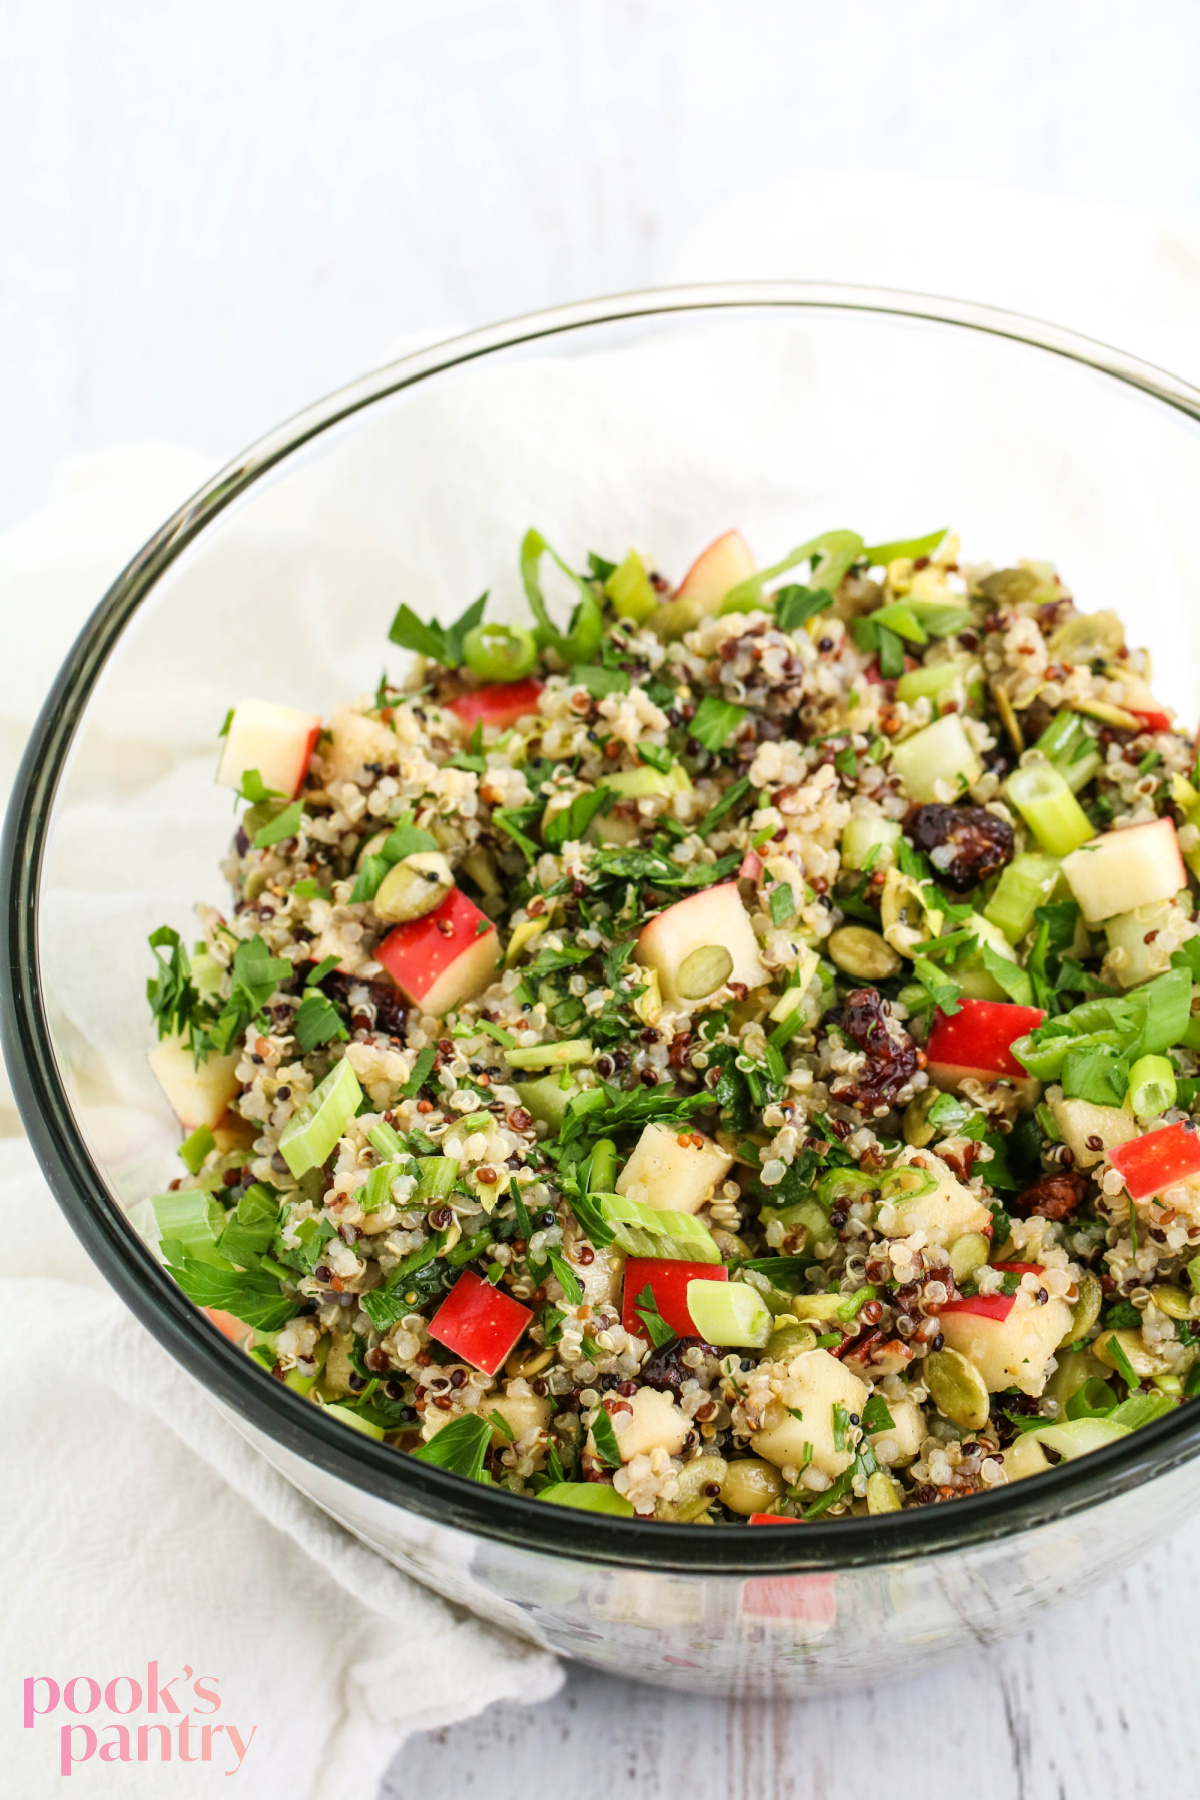 Apples and cranberries with quinoa and herbs.